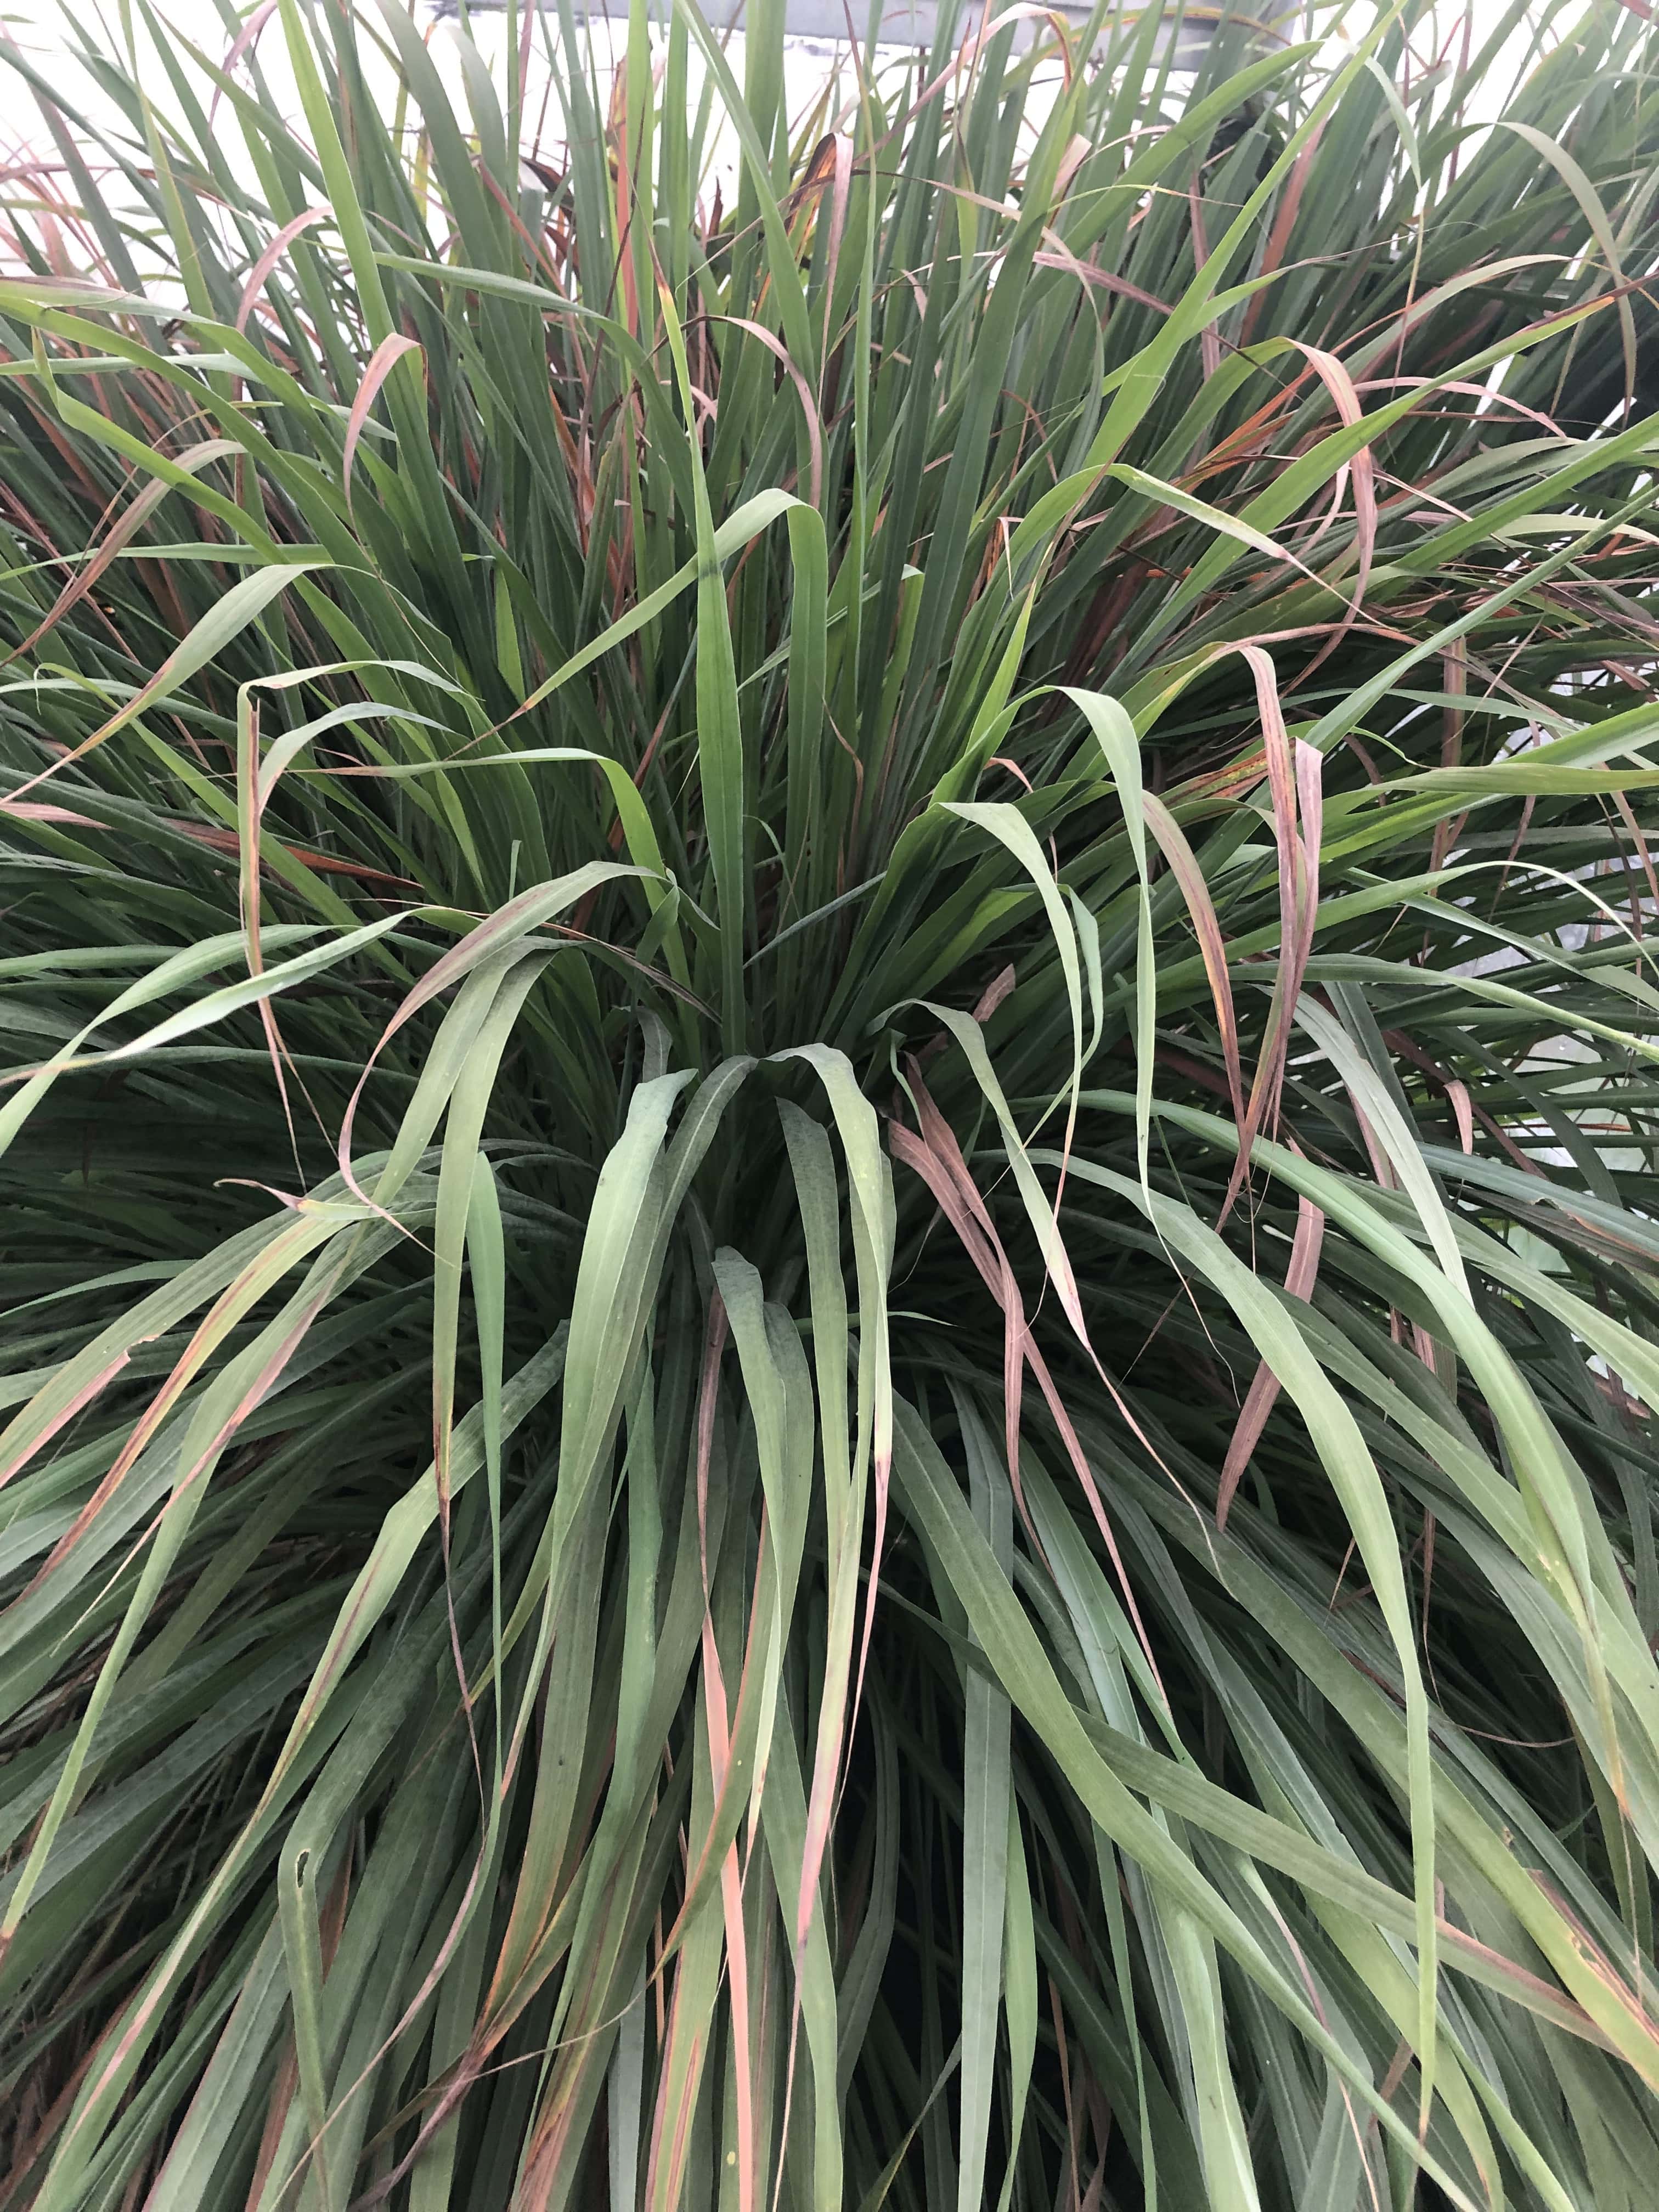 Long leaves of lemon grass growing from the center of the plant.